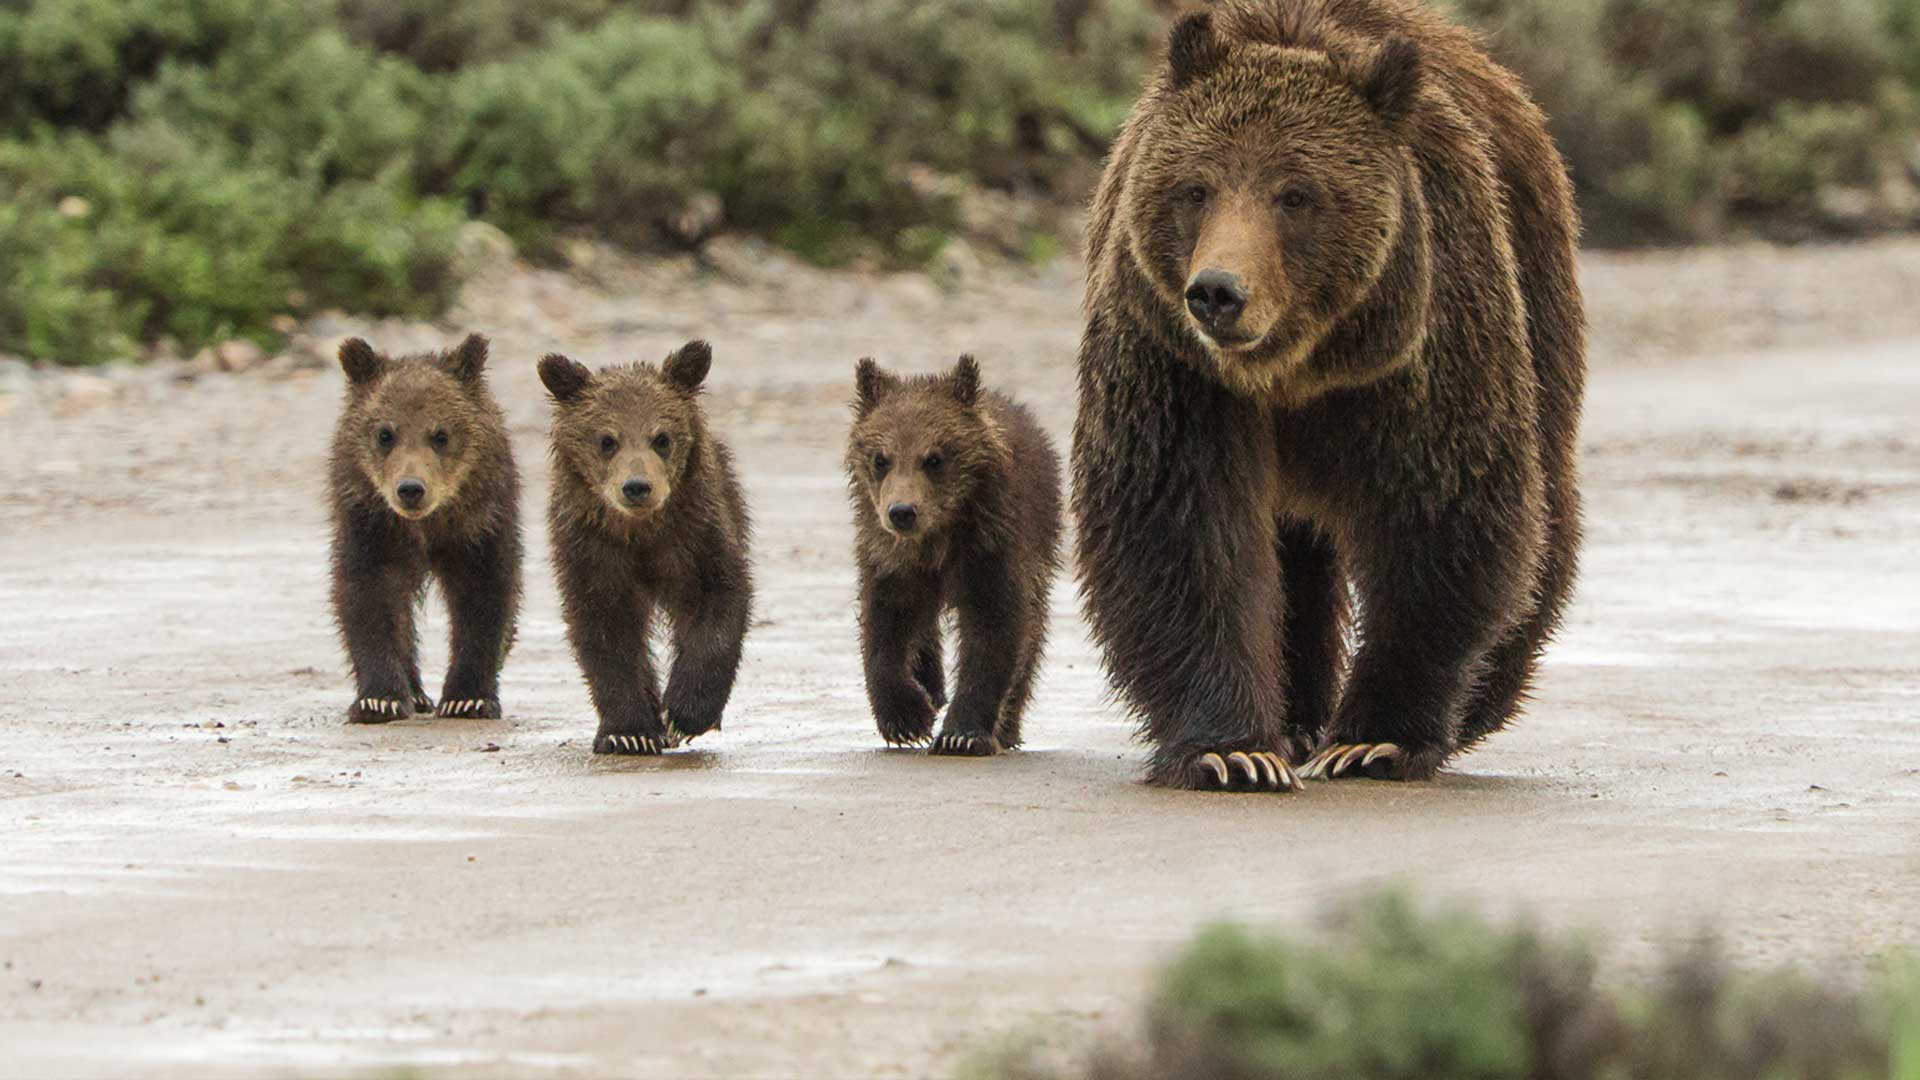 The most famous bear in the Tetons attempts to raise cubs amid conflicts with people.